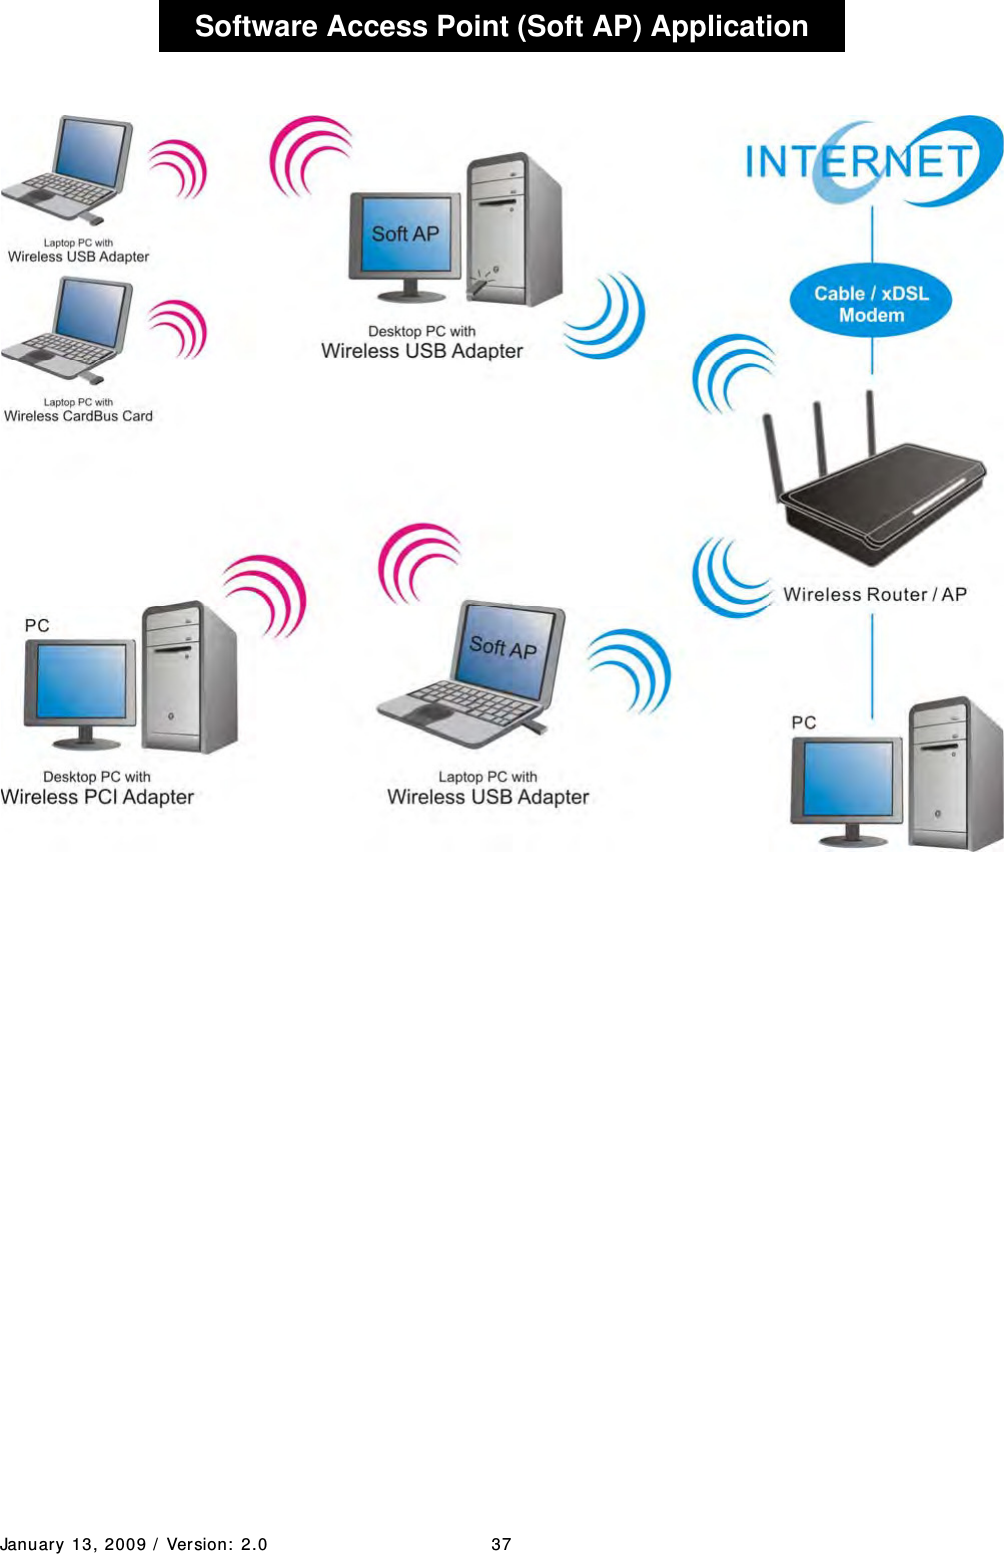 January 13, 2009 /  Ver sion:  2.0 37    Software Access Point (Soft AP) Application 